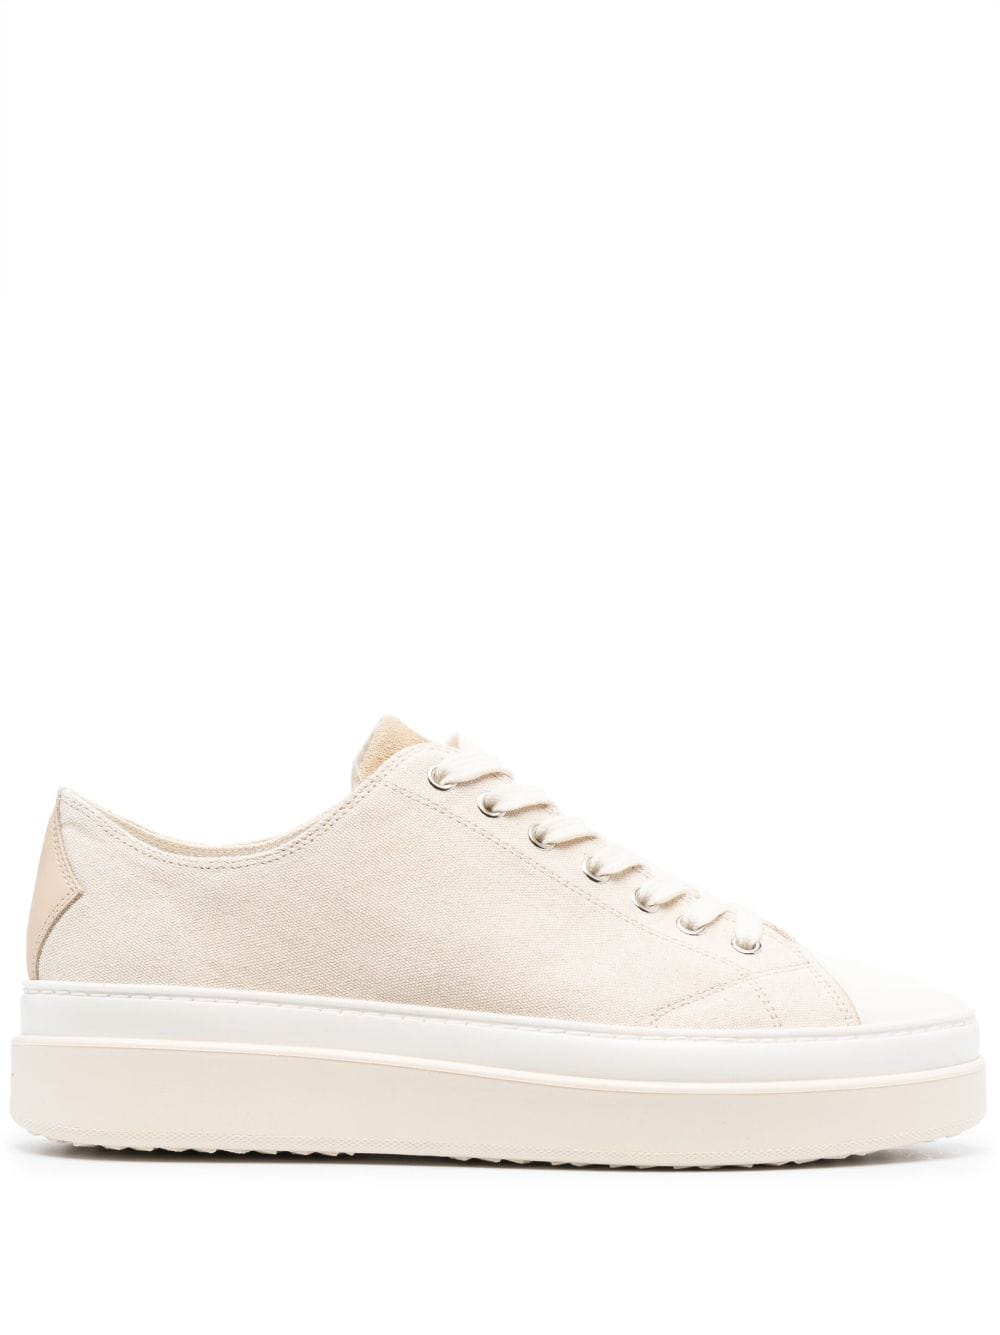 MARANT lace-up low-top sneakers - White von MARANT